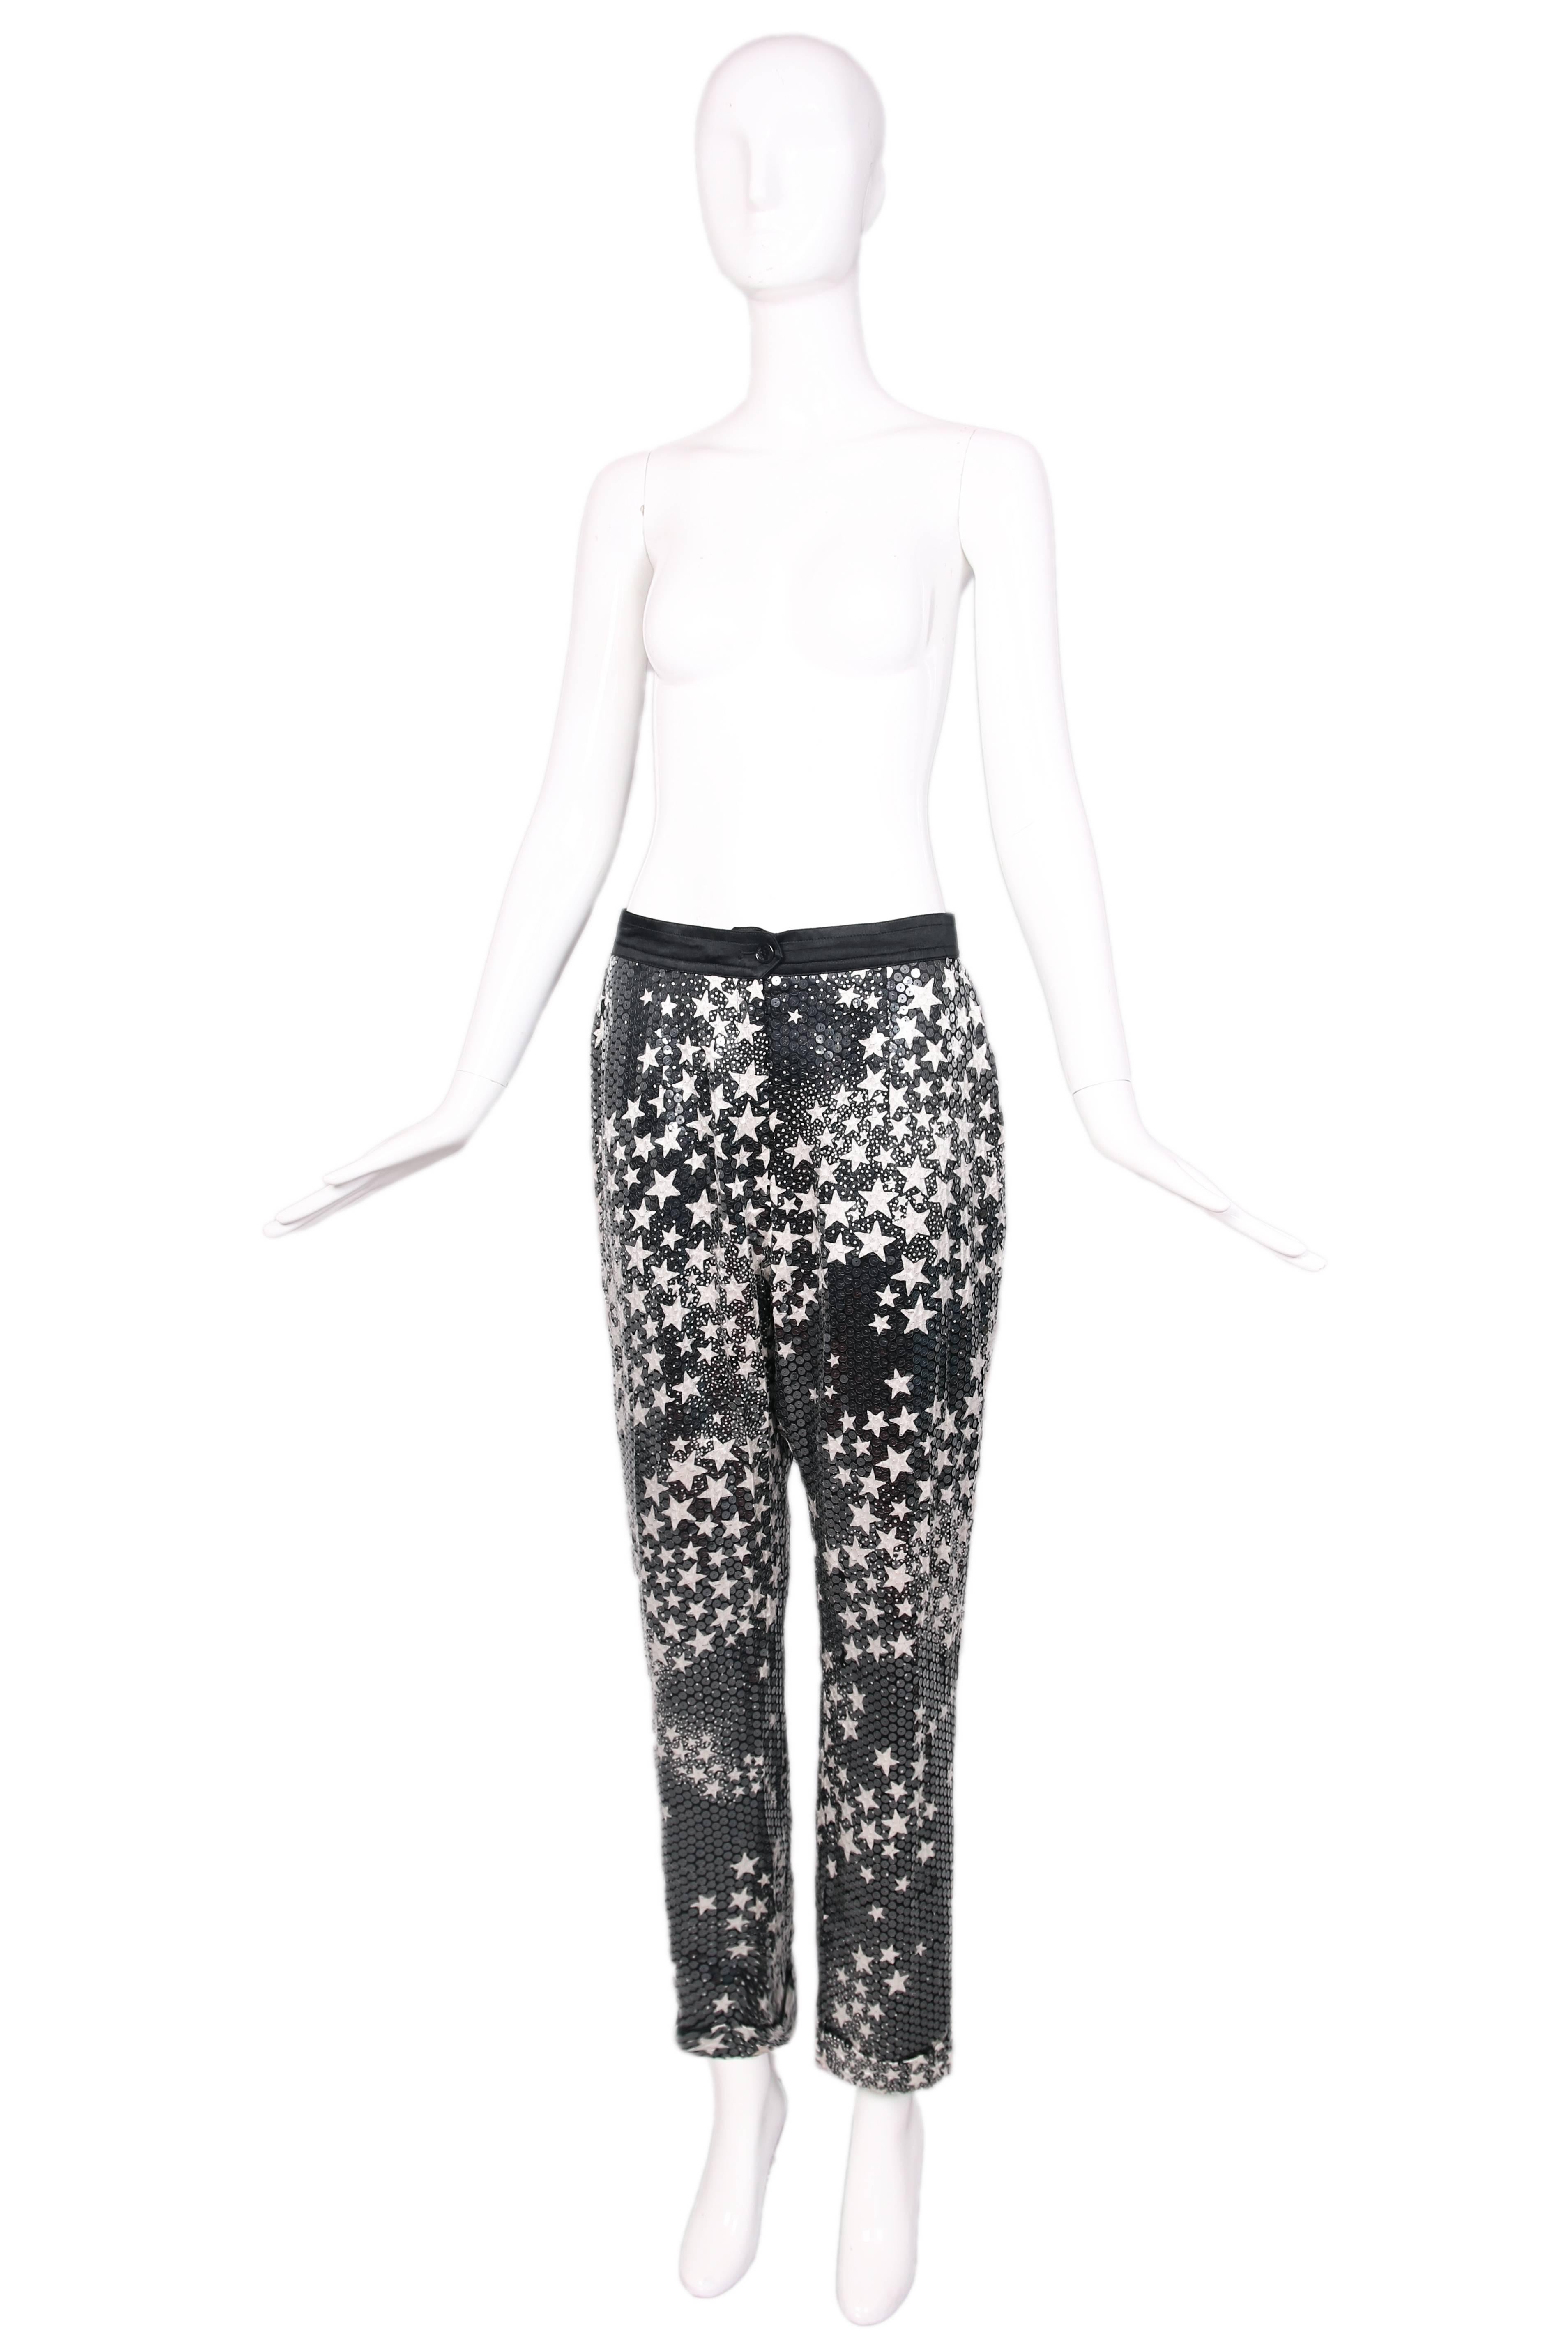 Black silk pants w/ clear sequin all over and white star print. Black waist band with button and zipper closure. In excellent condition. No tag, please consult measurements. 
MEASUREMENTS:
Waist - 28